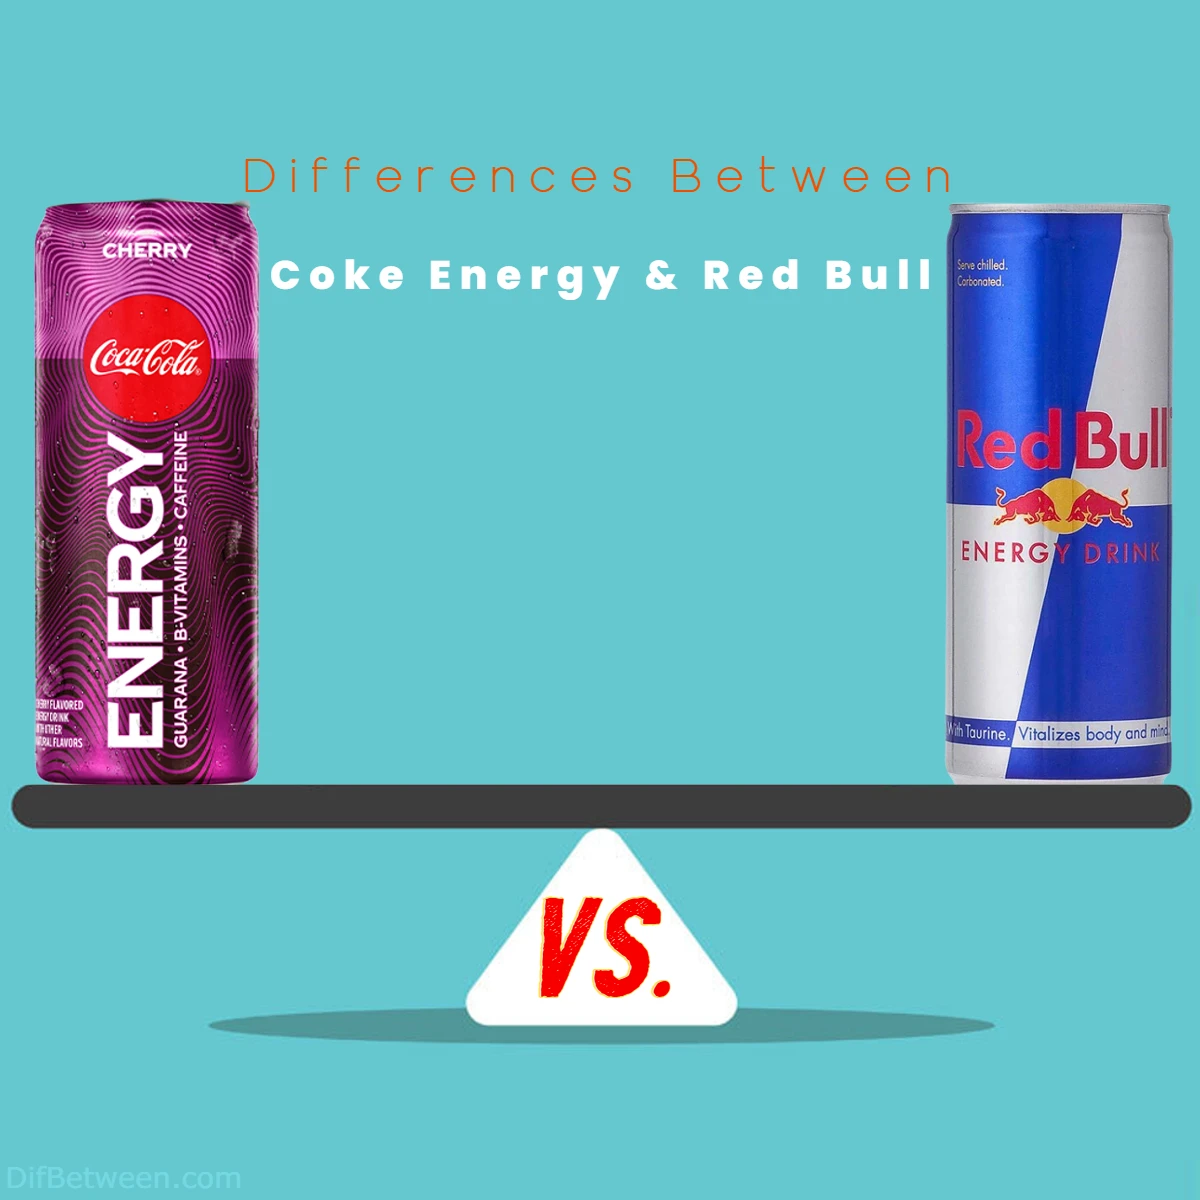 Differences Between Red Bull and Coke Energy Drink